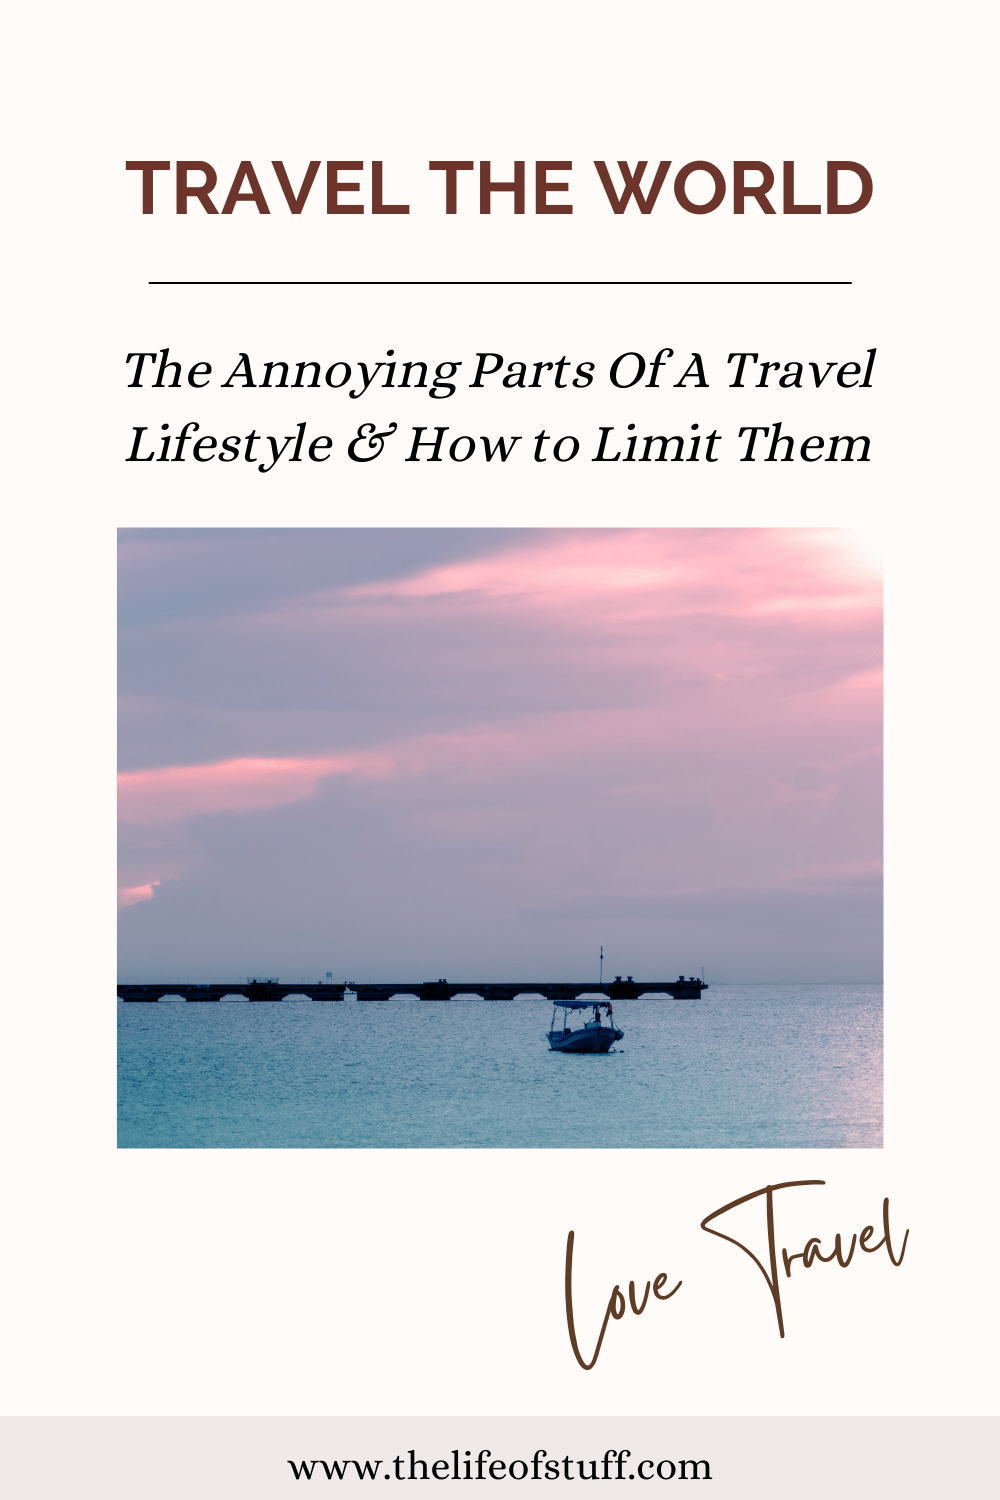 The Annoying Parts Of A Travel Lifestyle & How to Limit Them - The Life of Stuff